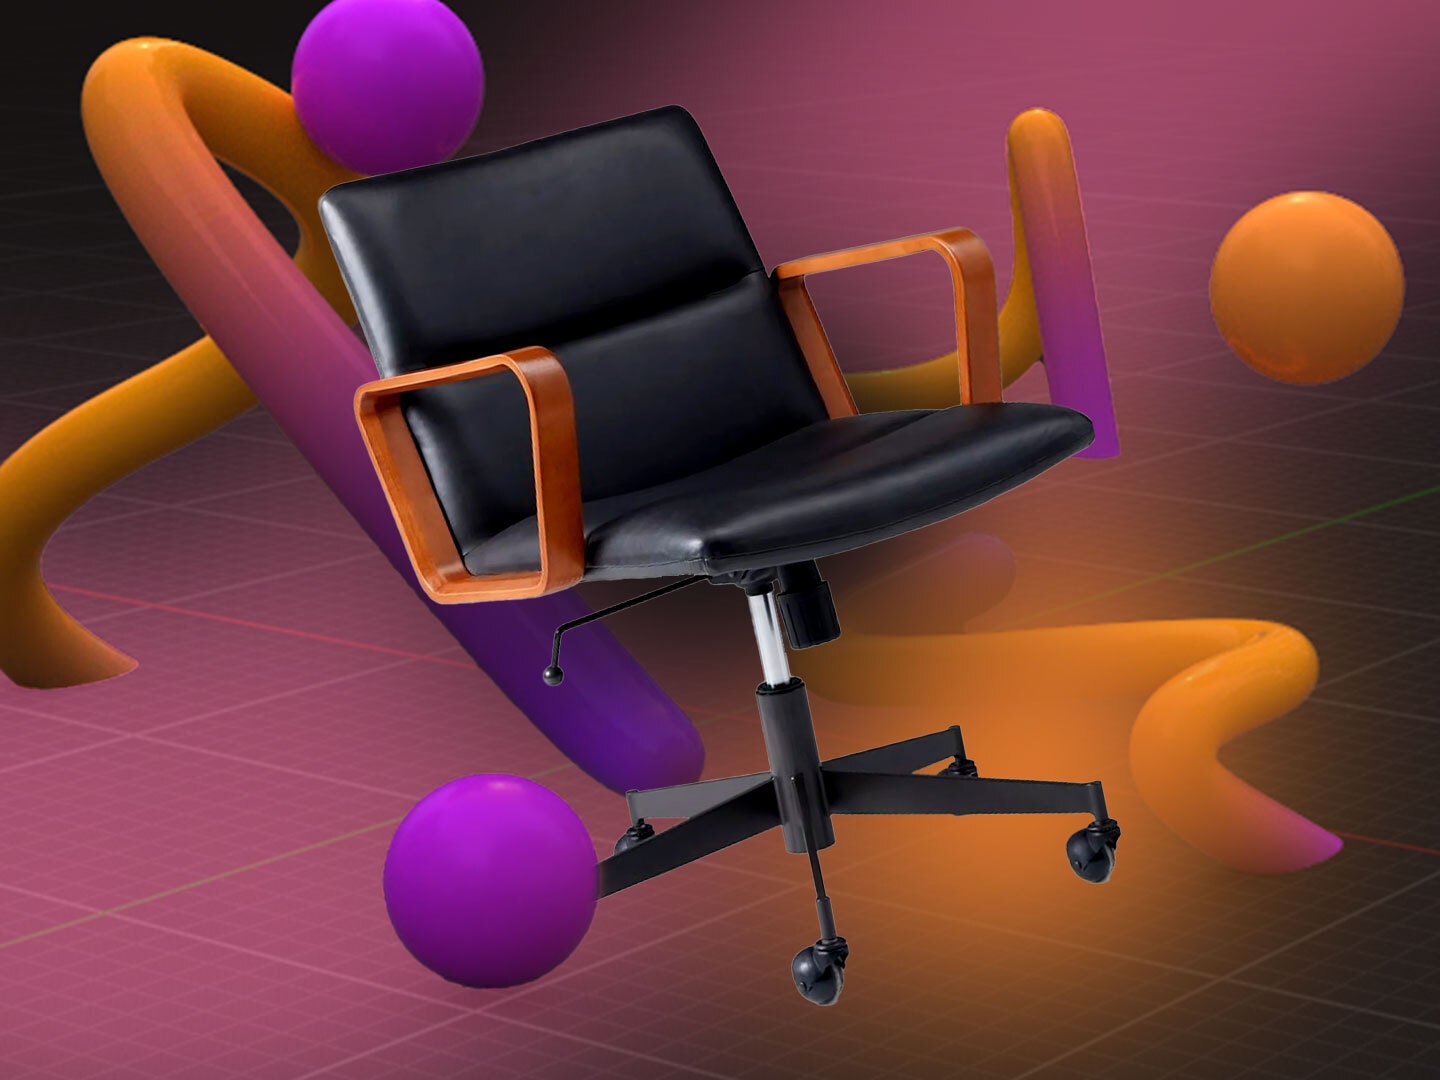 The best ergonomic office chairs for sitting comfortably all-Zoom long